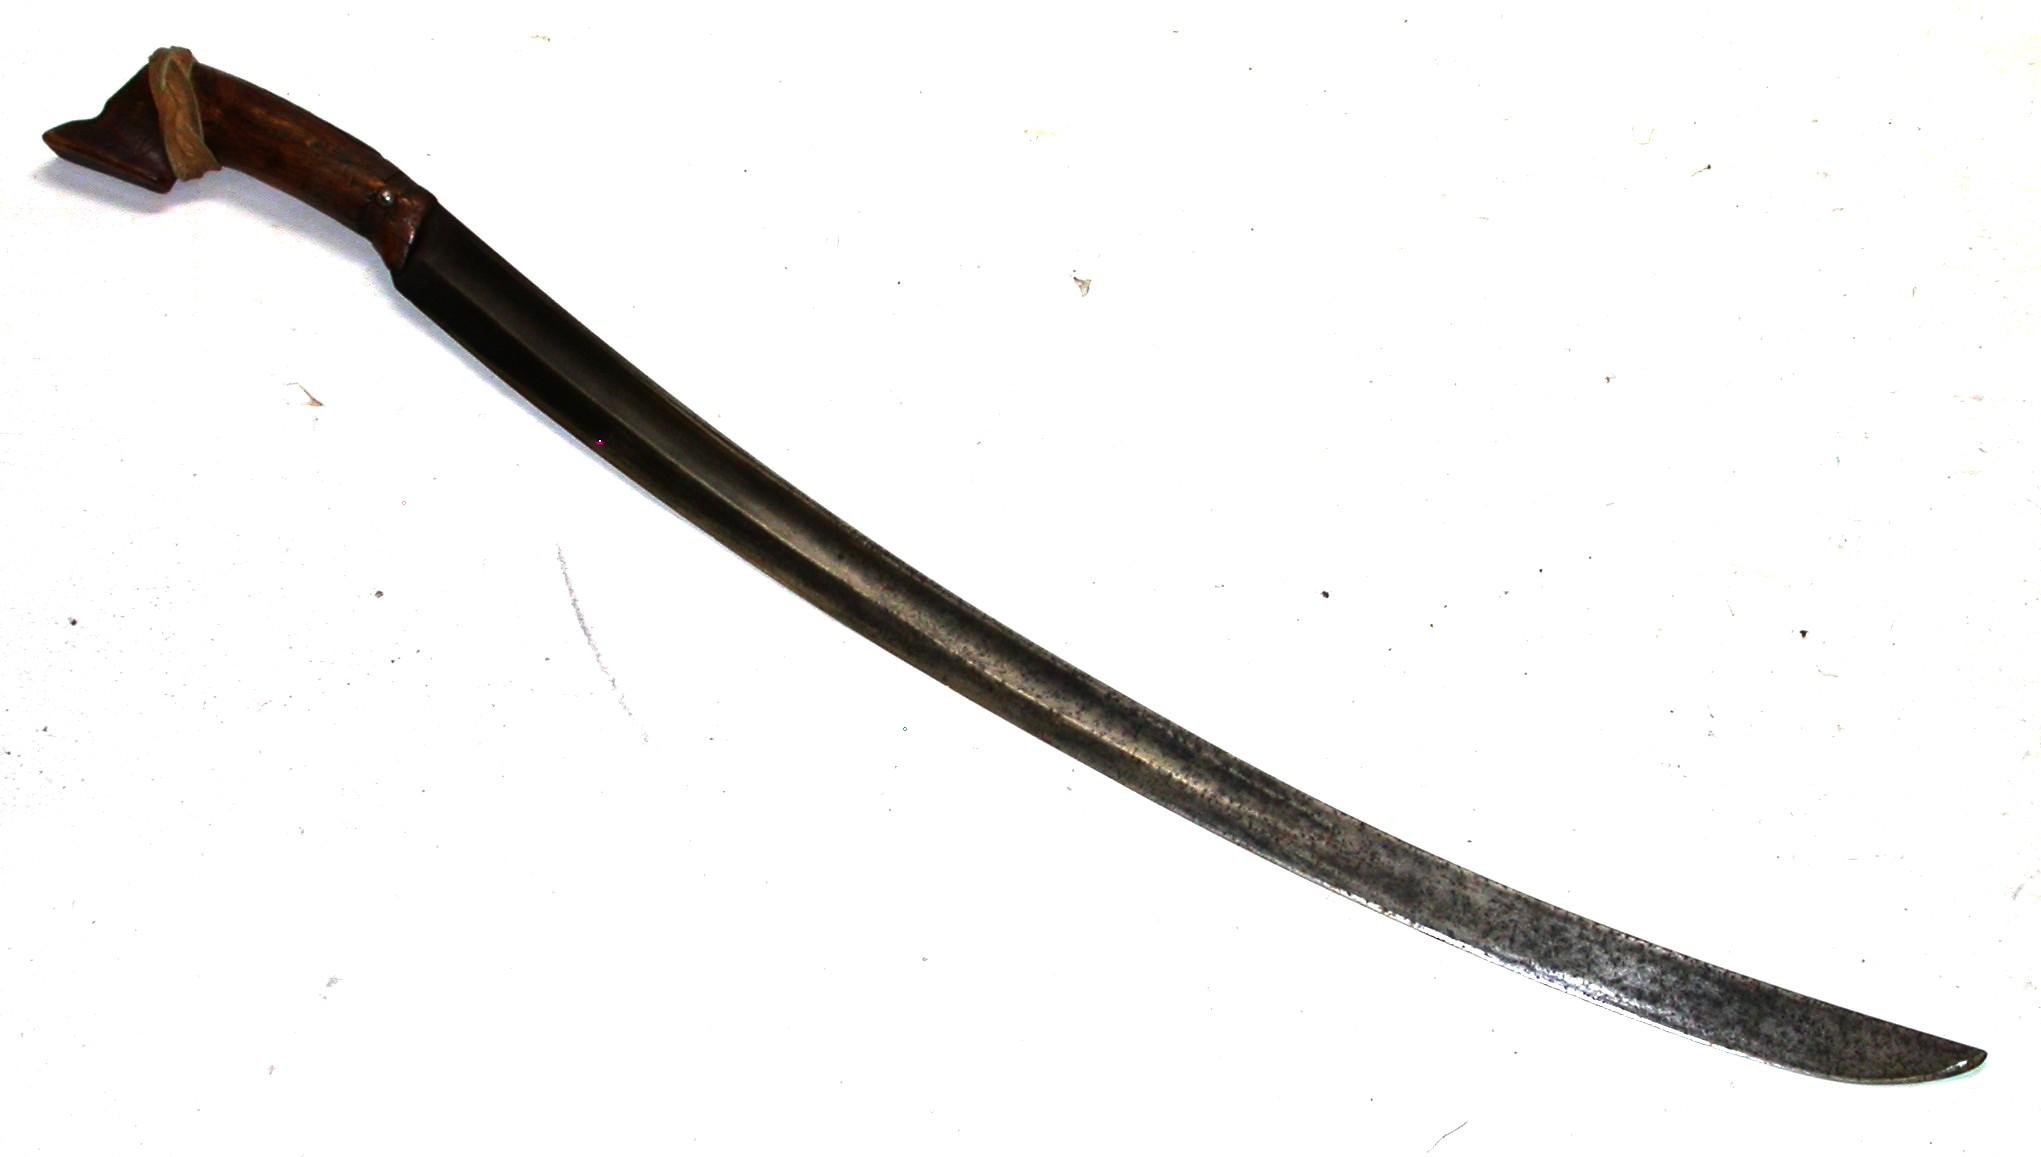 Ethiopian Military Sword with an English Blade (A)